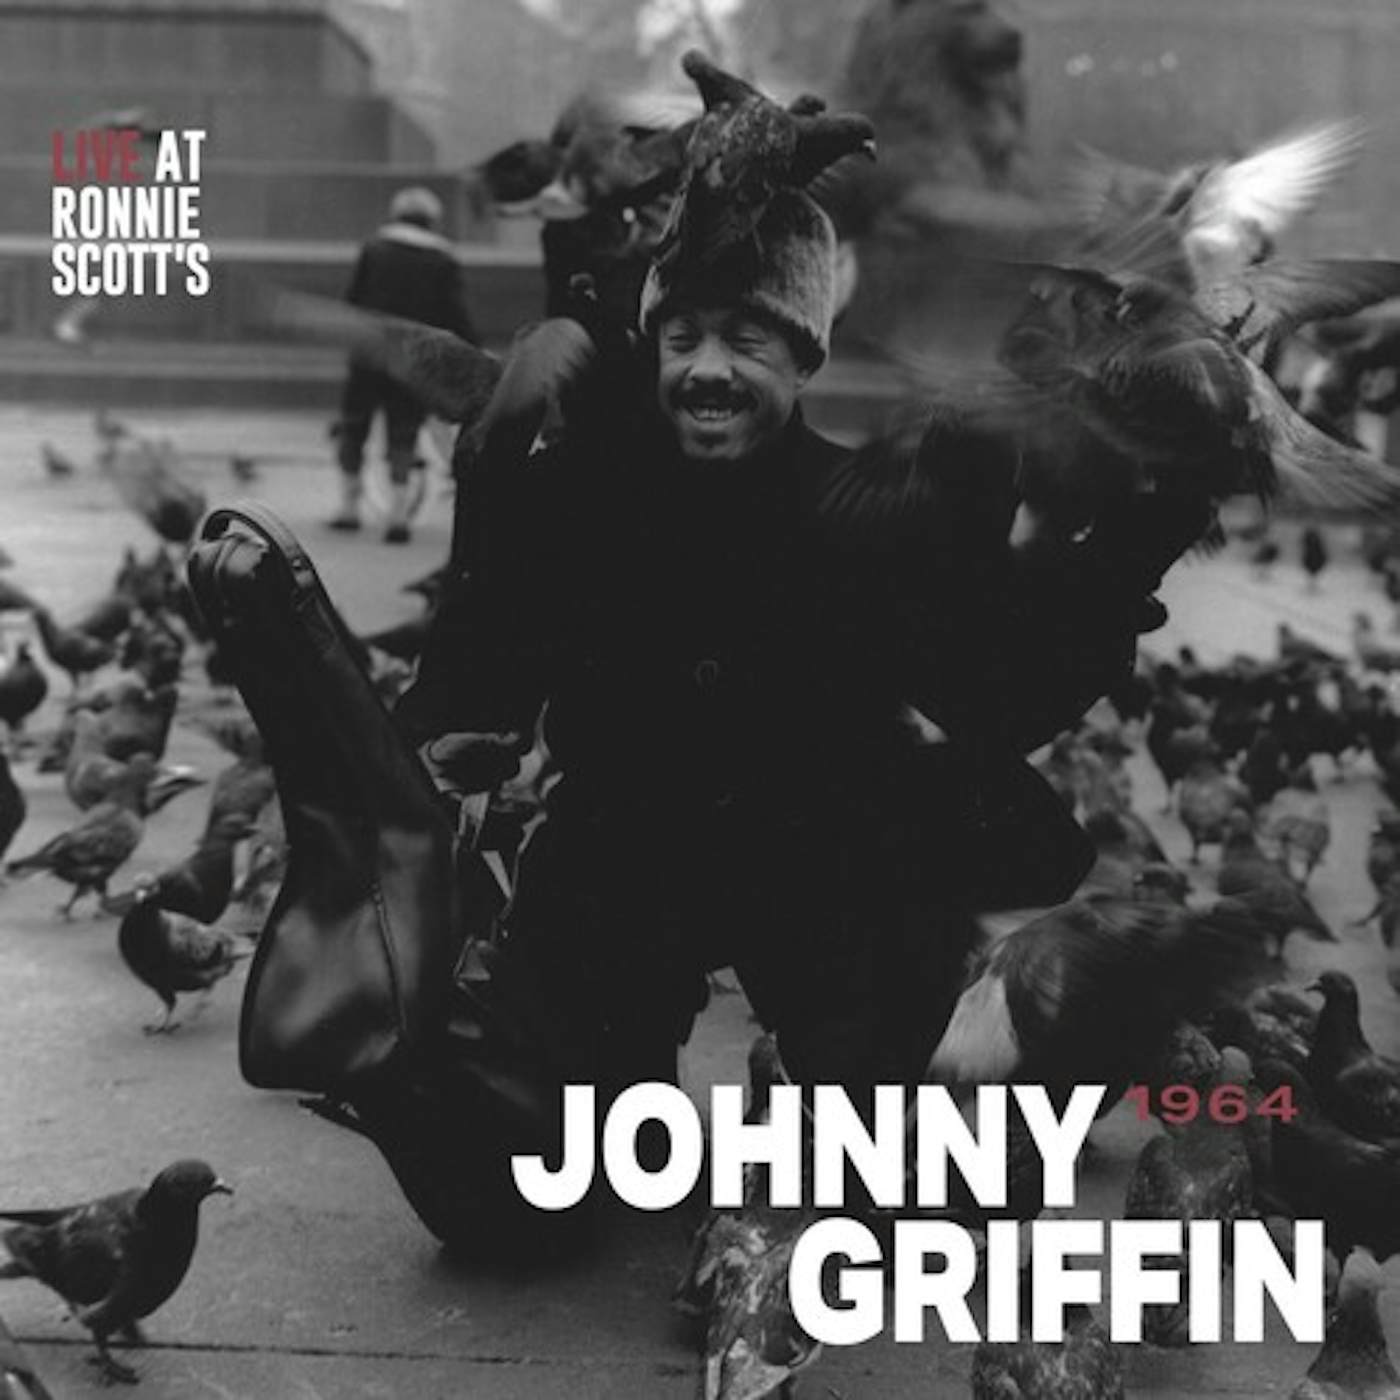 Johnny Griffin Live At Ronnie Scott's 1964 Vinyl Record